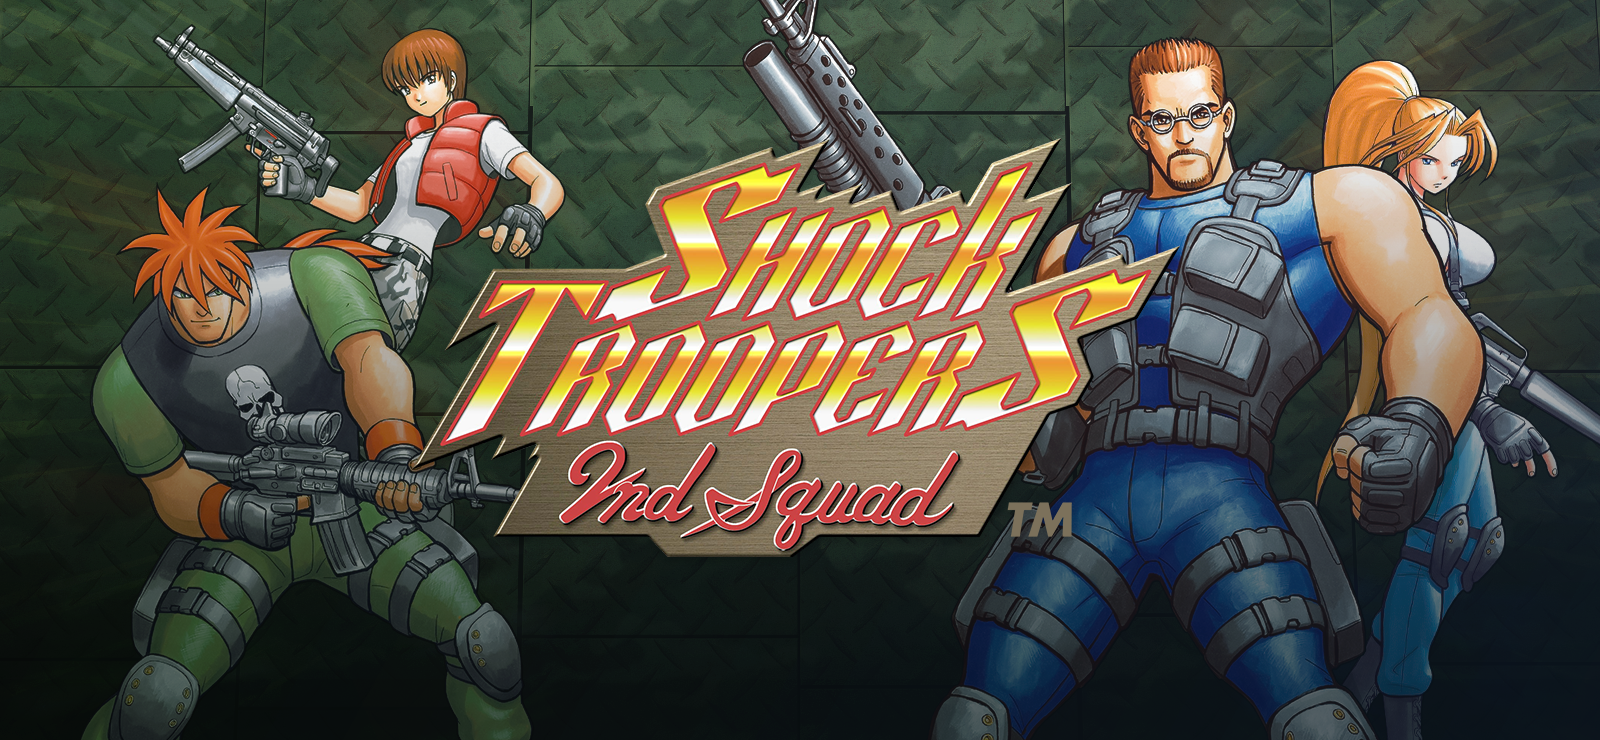 SHOCK TROOPERS: 2ND SQUAD